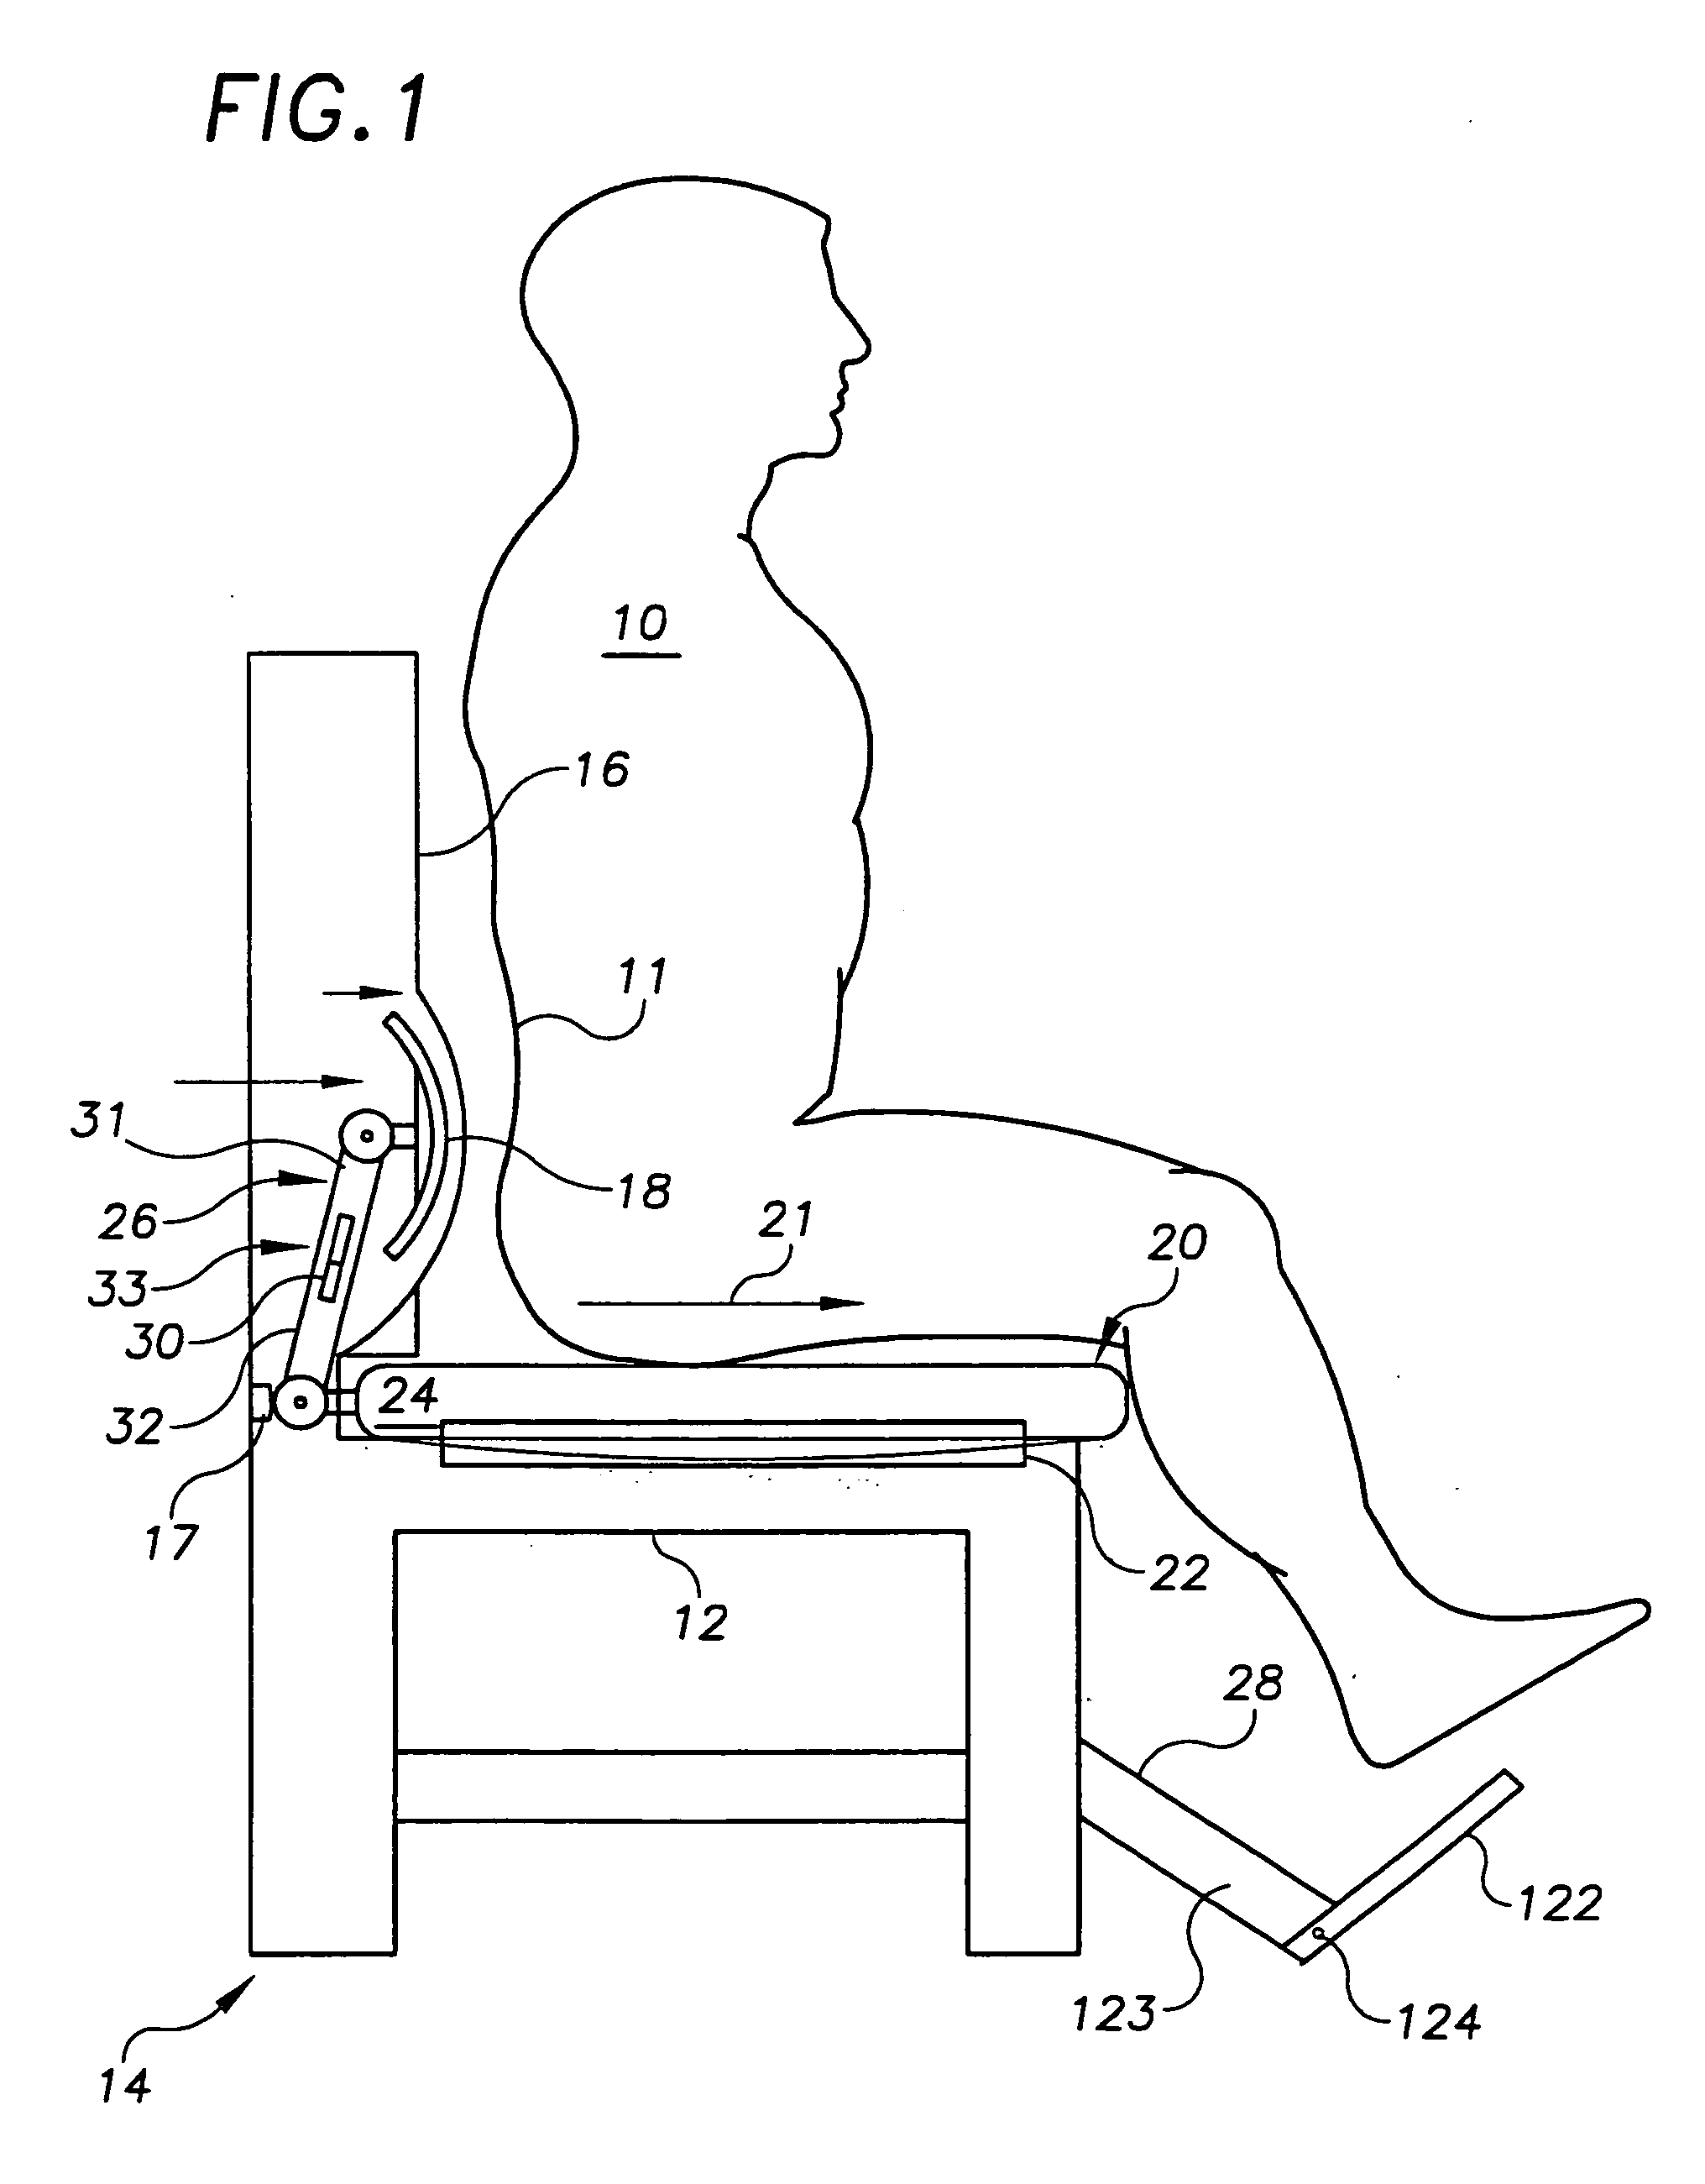 System for providing lumbar motion and support